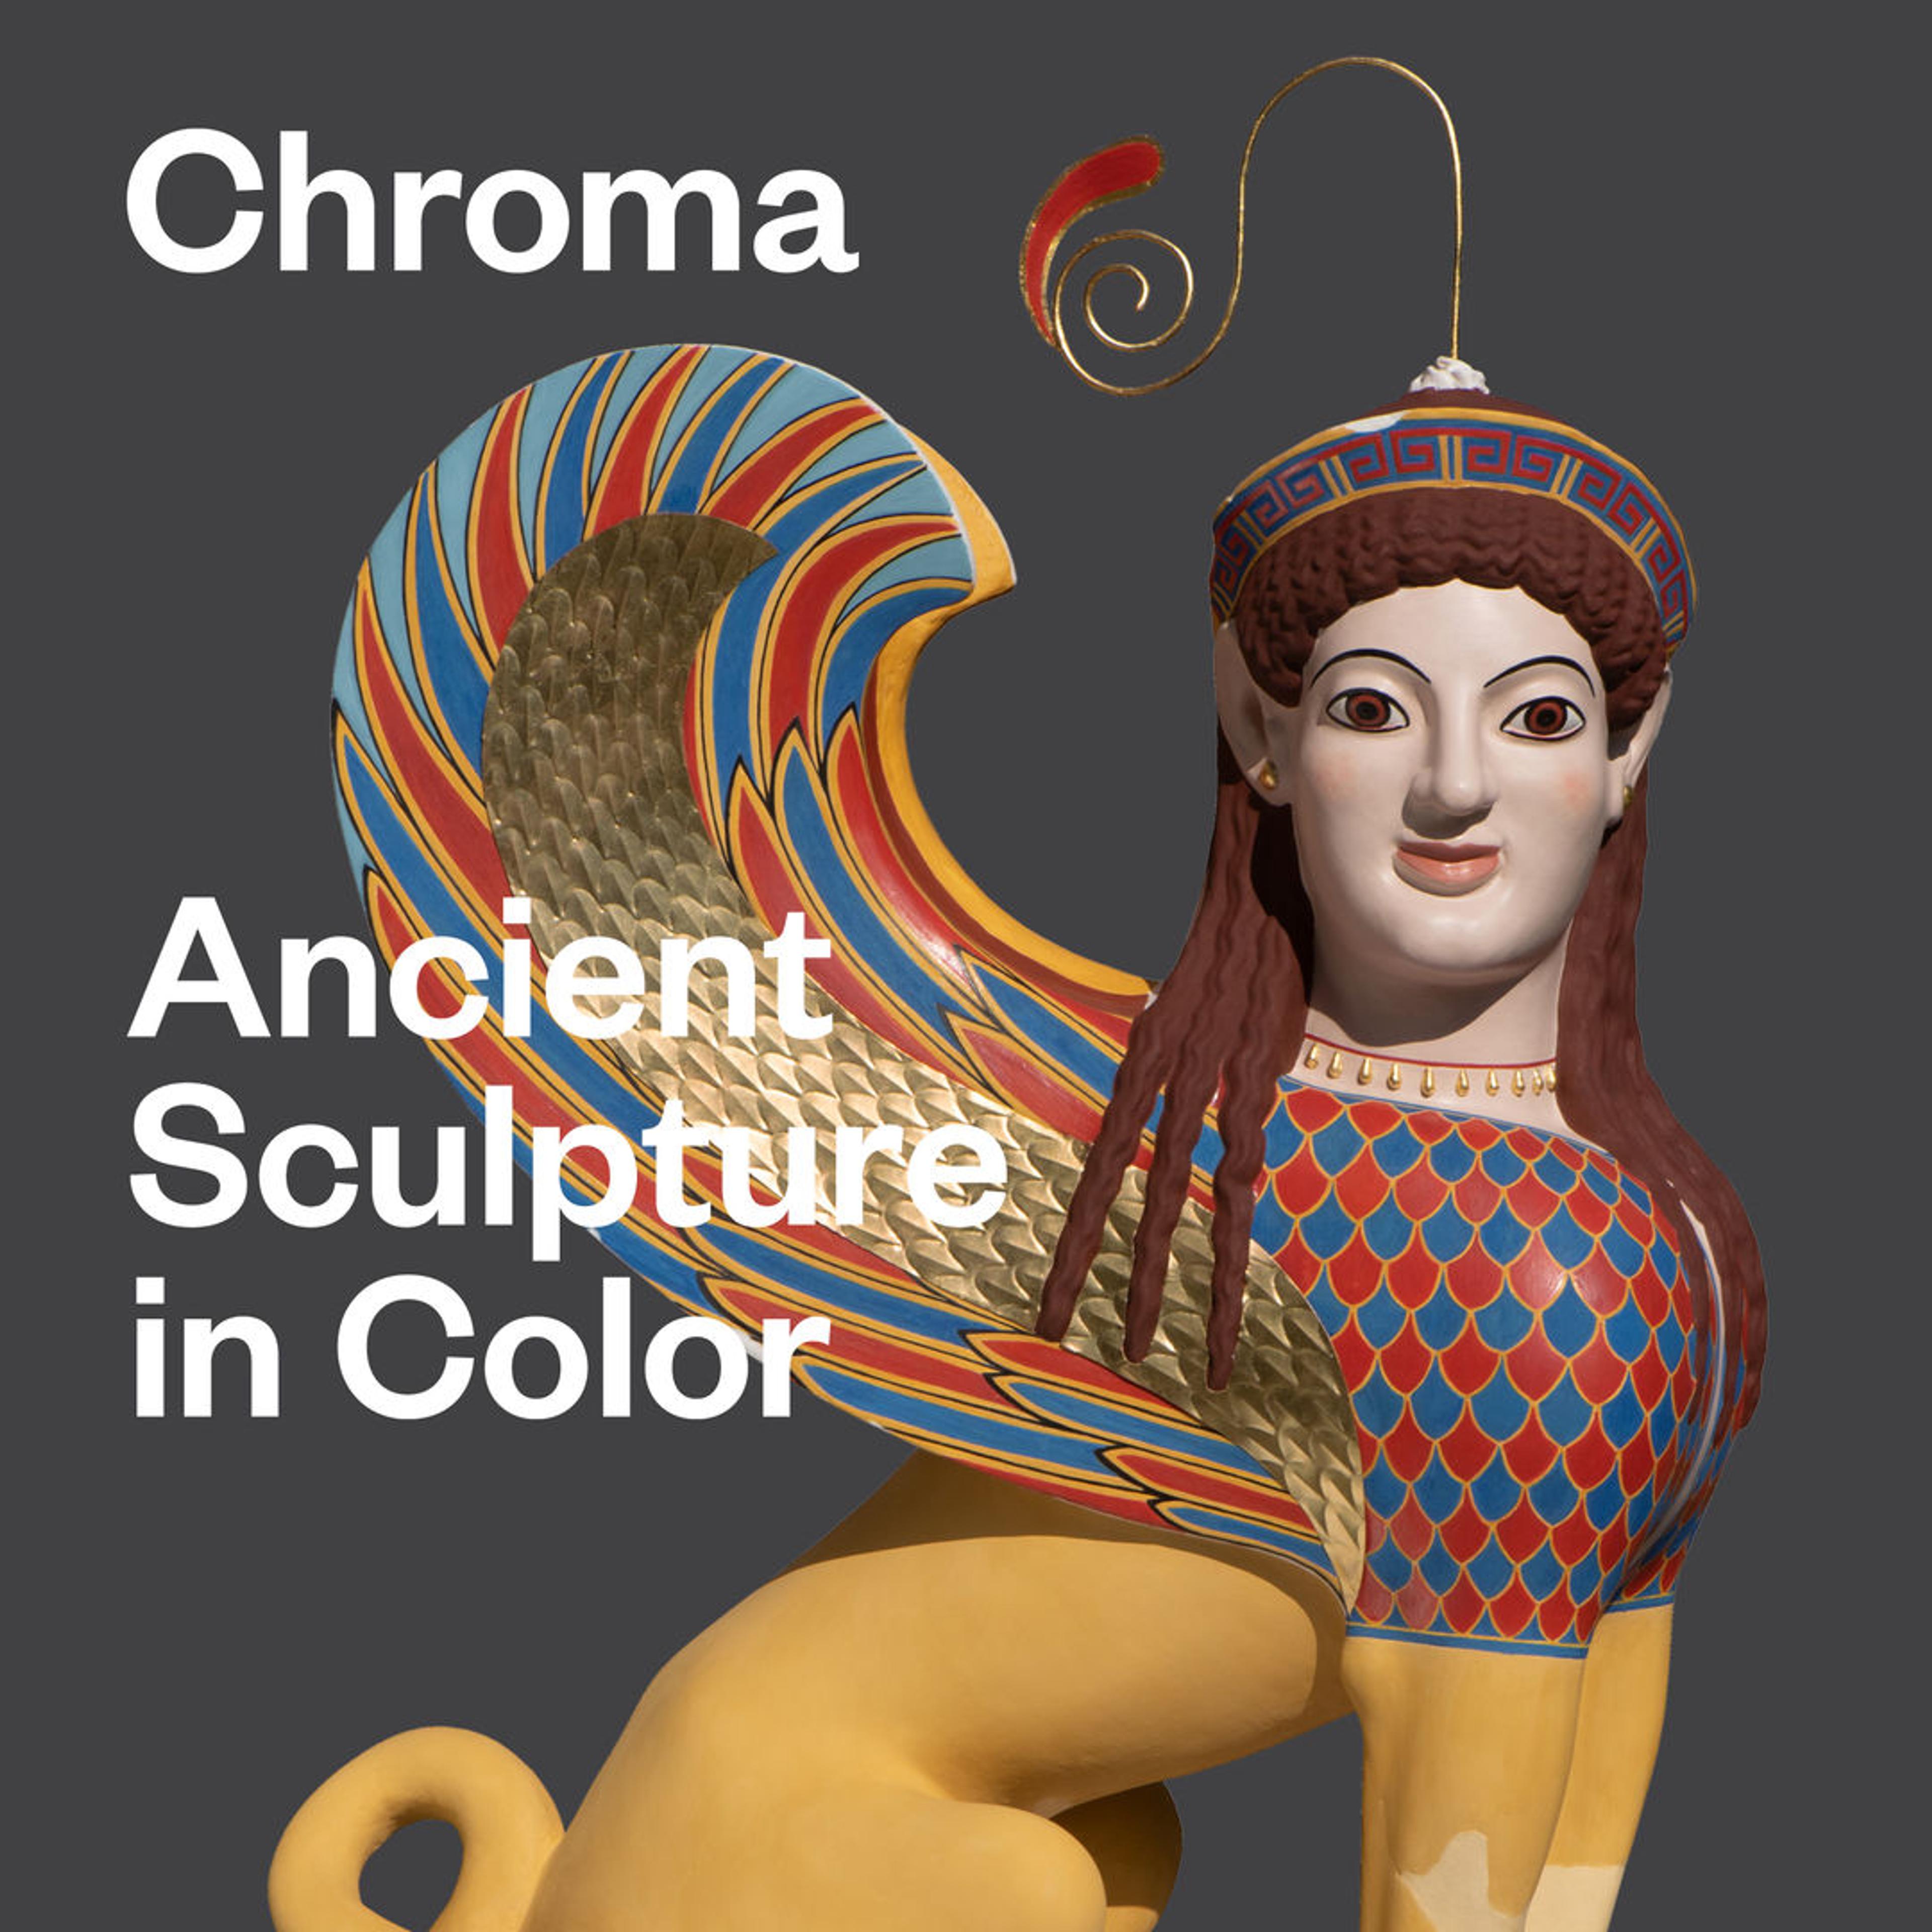 Chroma - Ancient Sculpture in Color